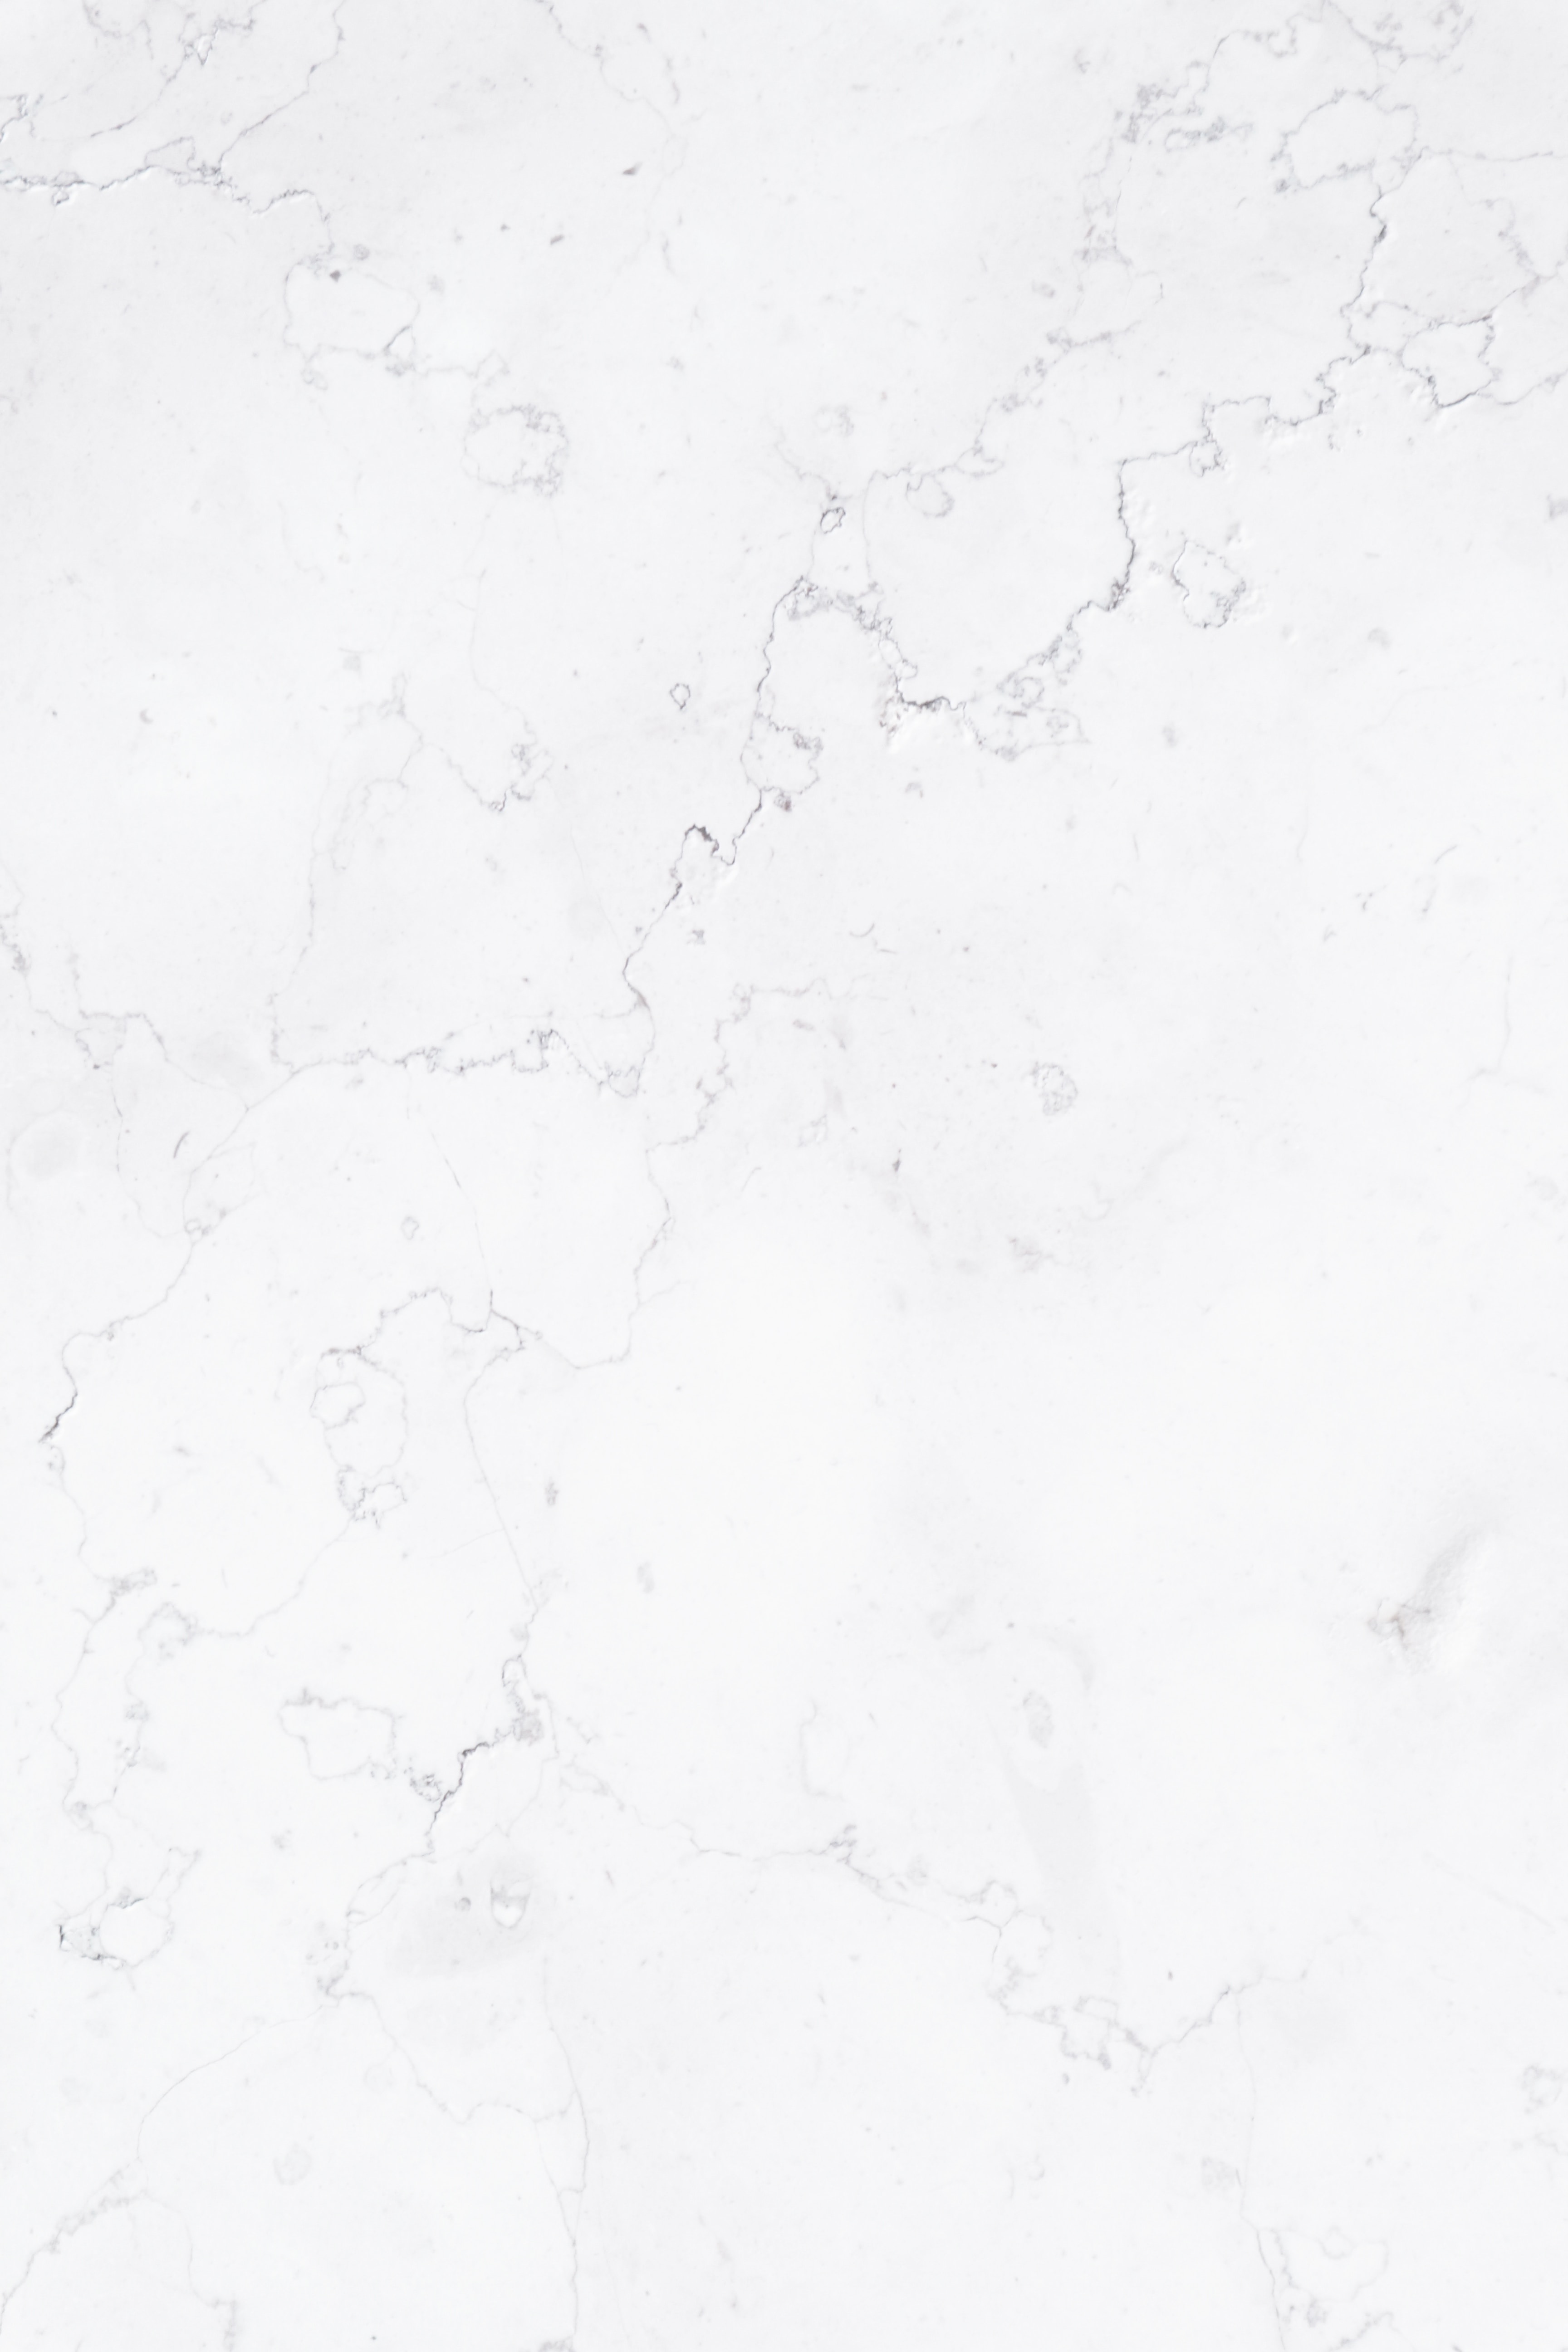 texture, white, textures, marble Aesthetic wallpaper